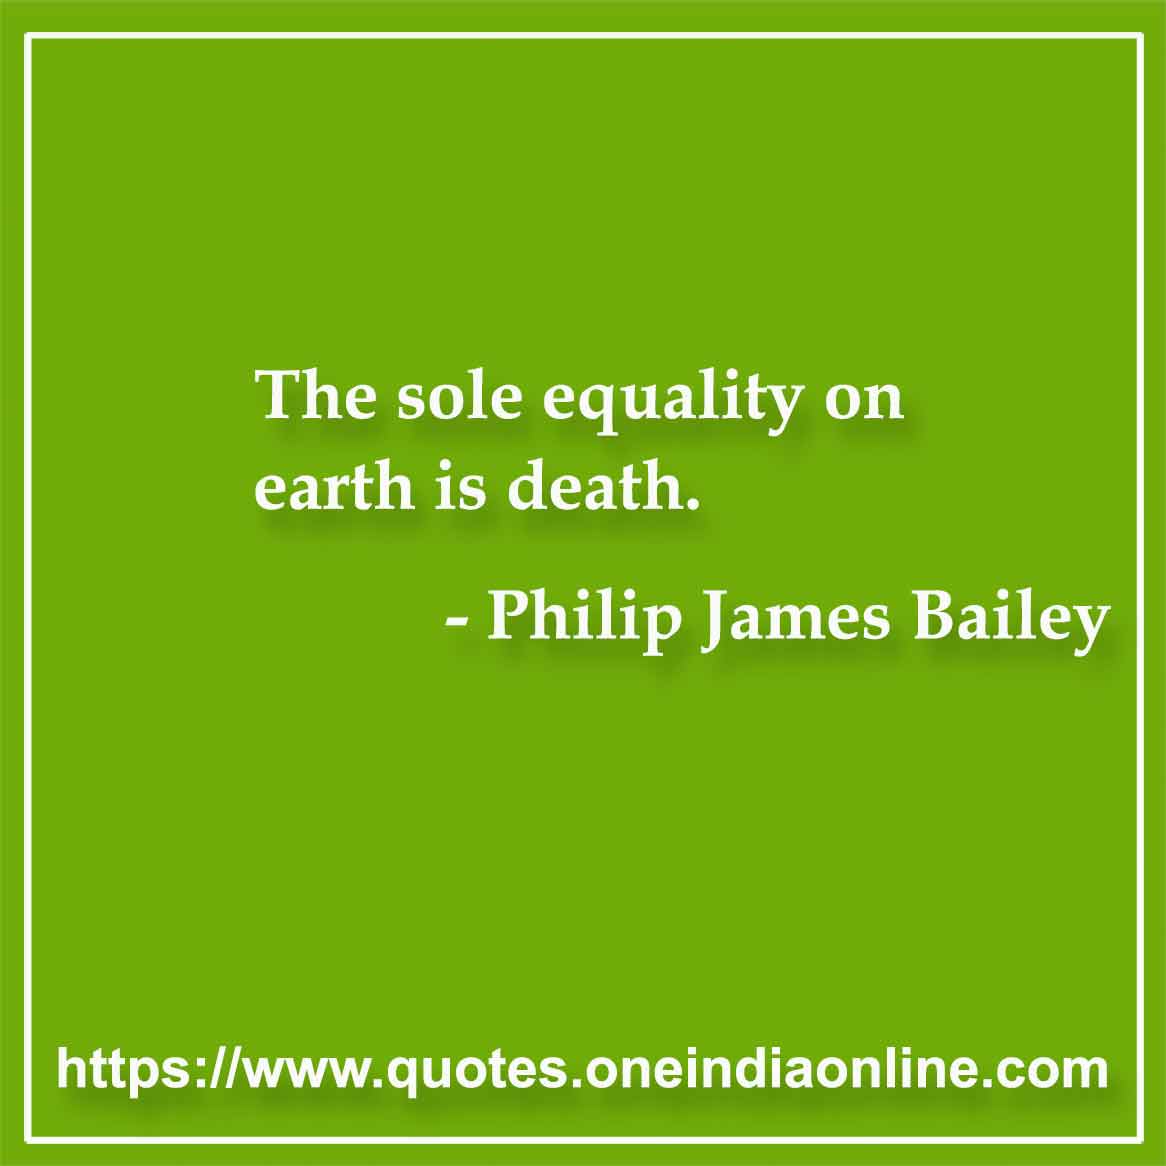 The sole equality on earth is death.

- Philip James Bailey